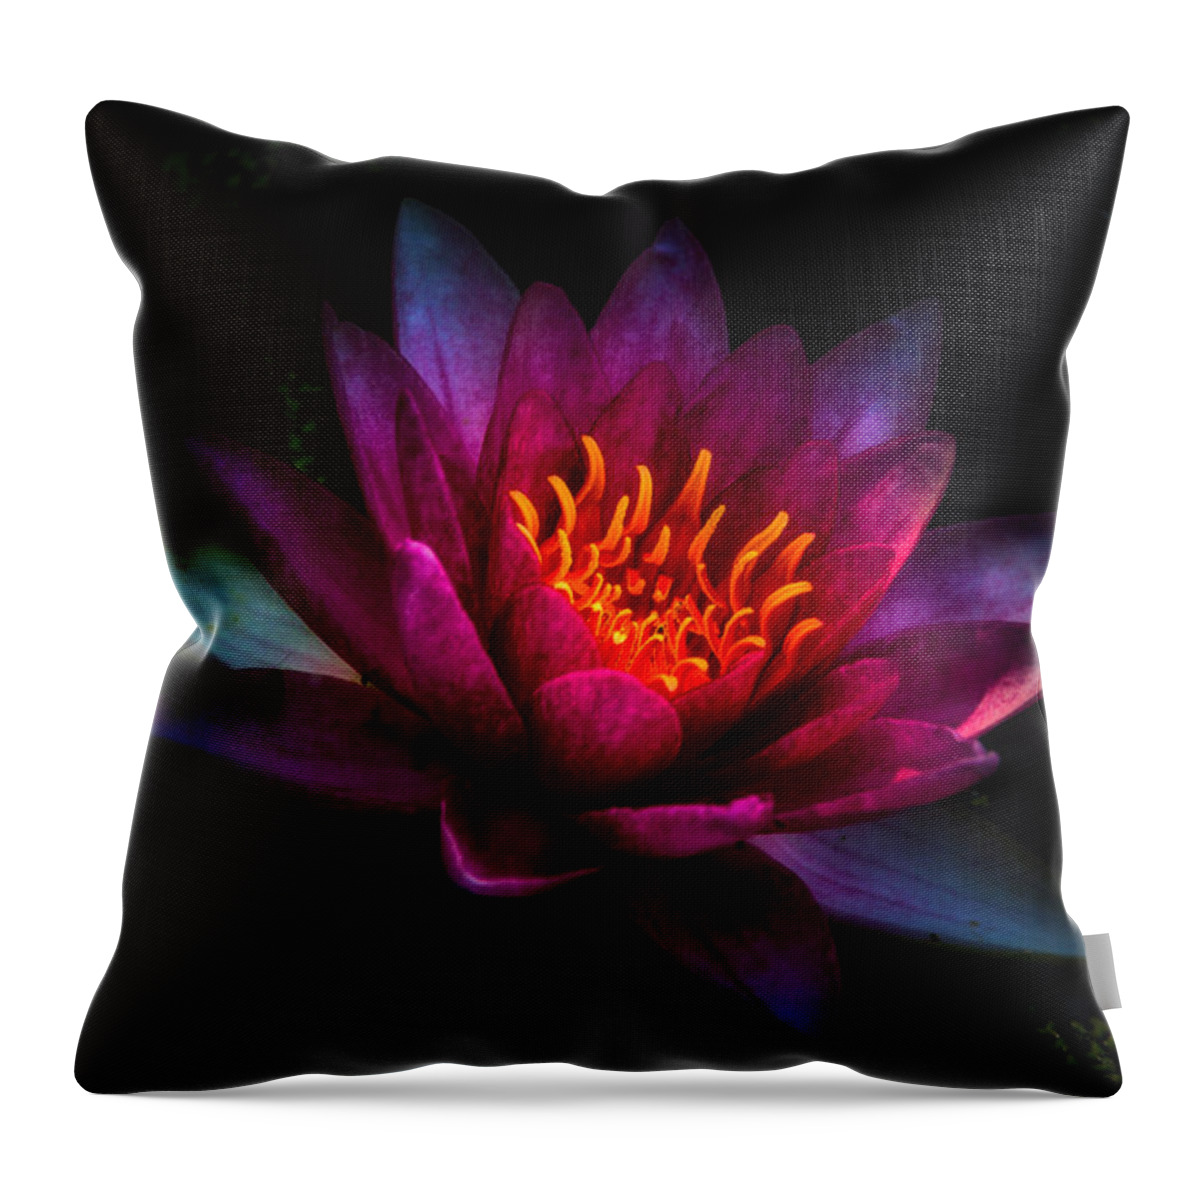 Jay Stockhaus Throw Pillow featuring the photograph Water Lily 2 by Jay Stockhaus